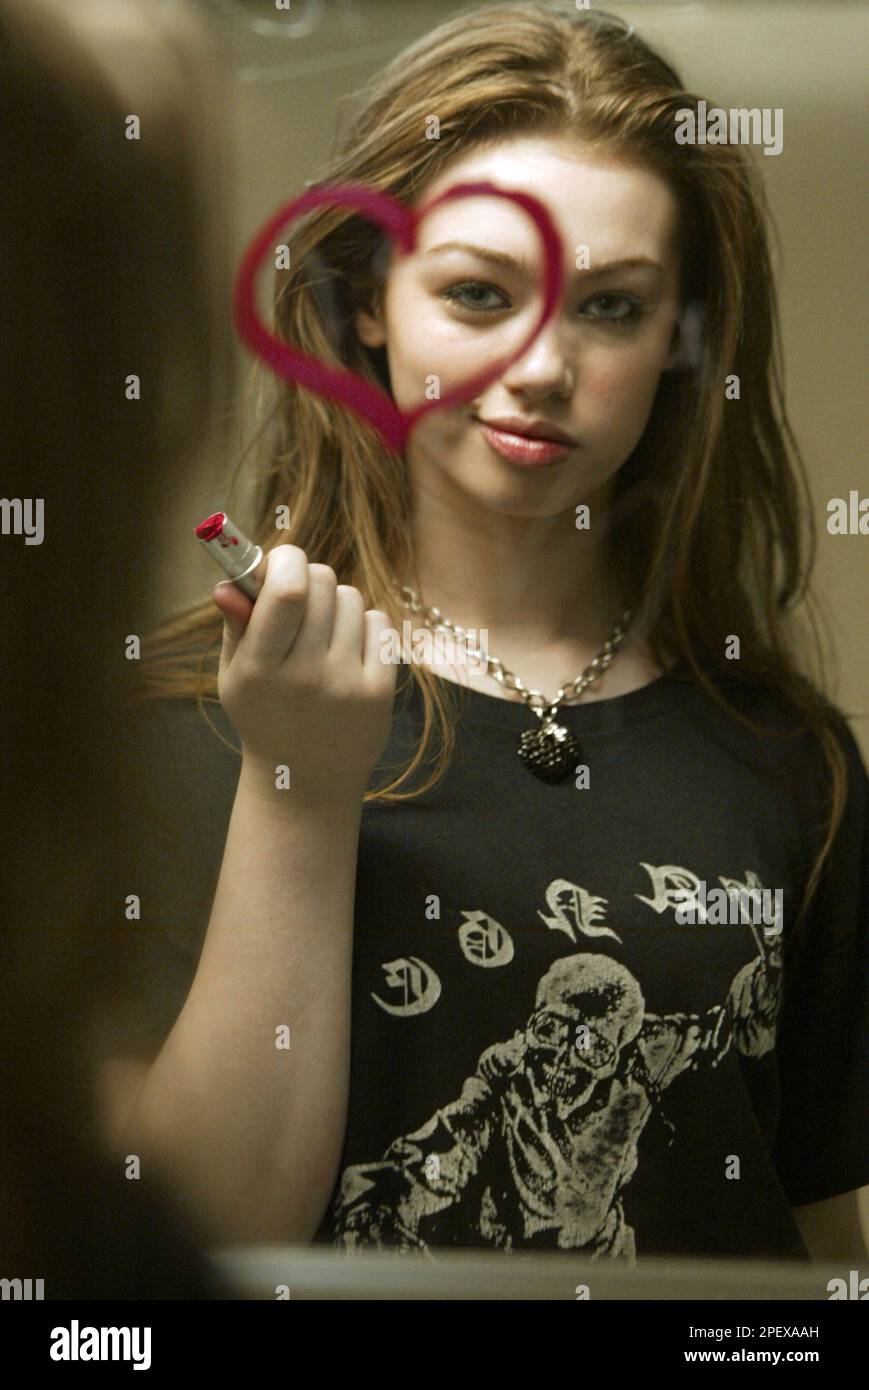 Singer Skye Sweetnam poses during the filming of a music video at the  Silverado Aquatic Center in Long Beach, Calif., May 4, 2004. Sweetnam is  finishing her new album "Noise from the